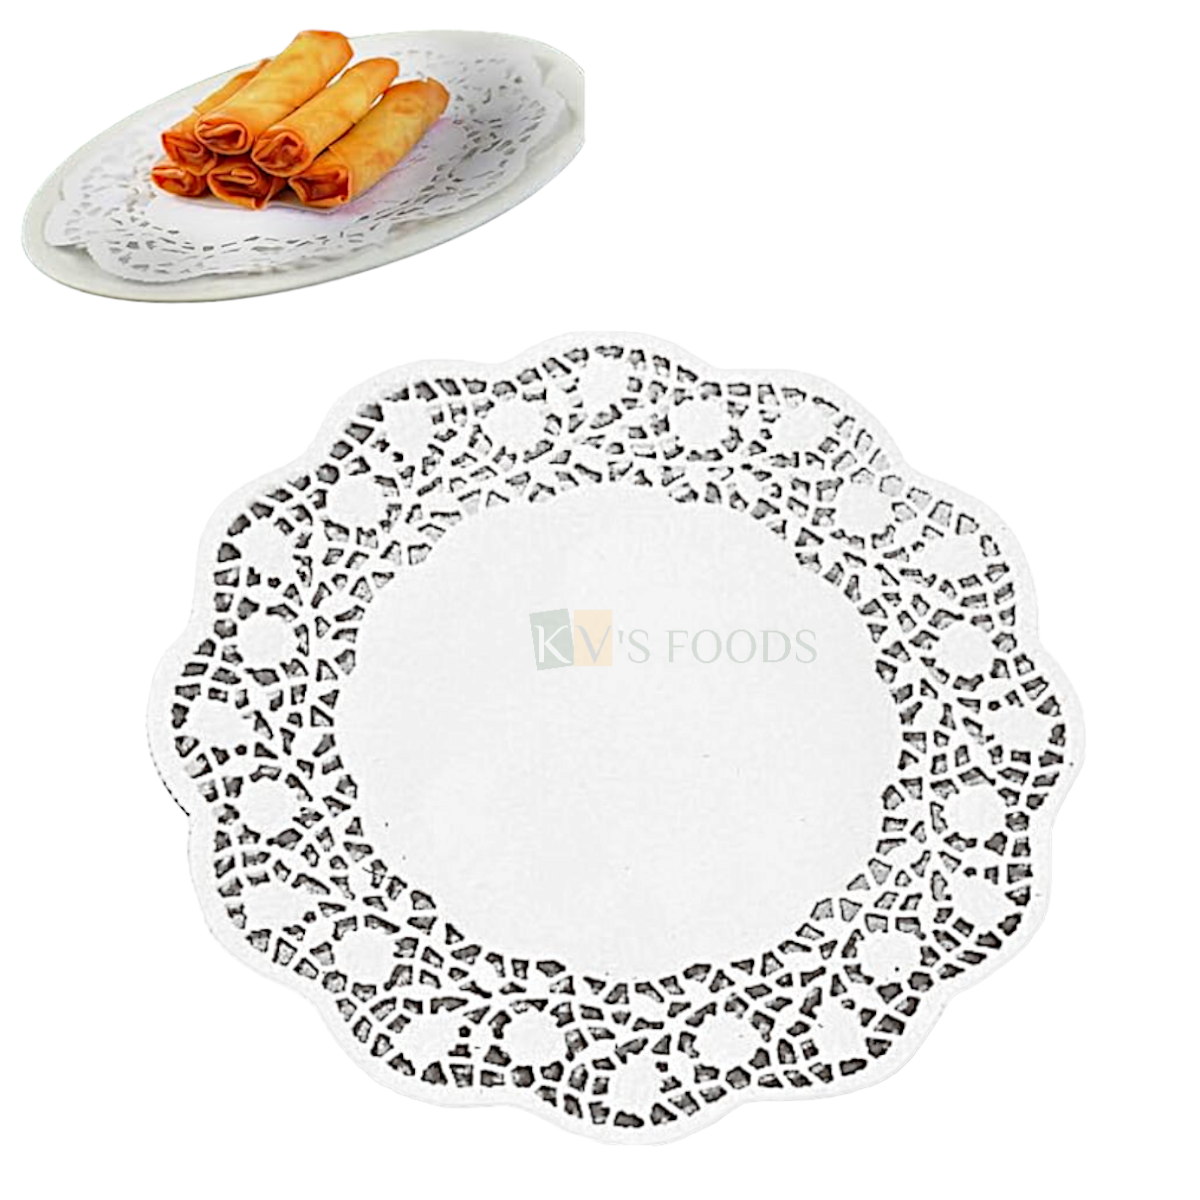 1 Packet White Round Doilies Laces Paper 100 Nos. Size 4.5 Inches, Disposable Doyleys Paper for Cakes Finger Food Snacks, Muffins Cupcakes Desserts Pastries Birthday Party Weddings Oil Absorbing Paper